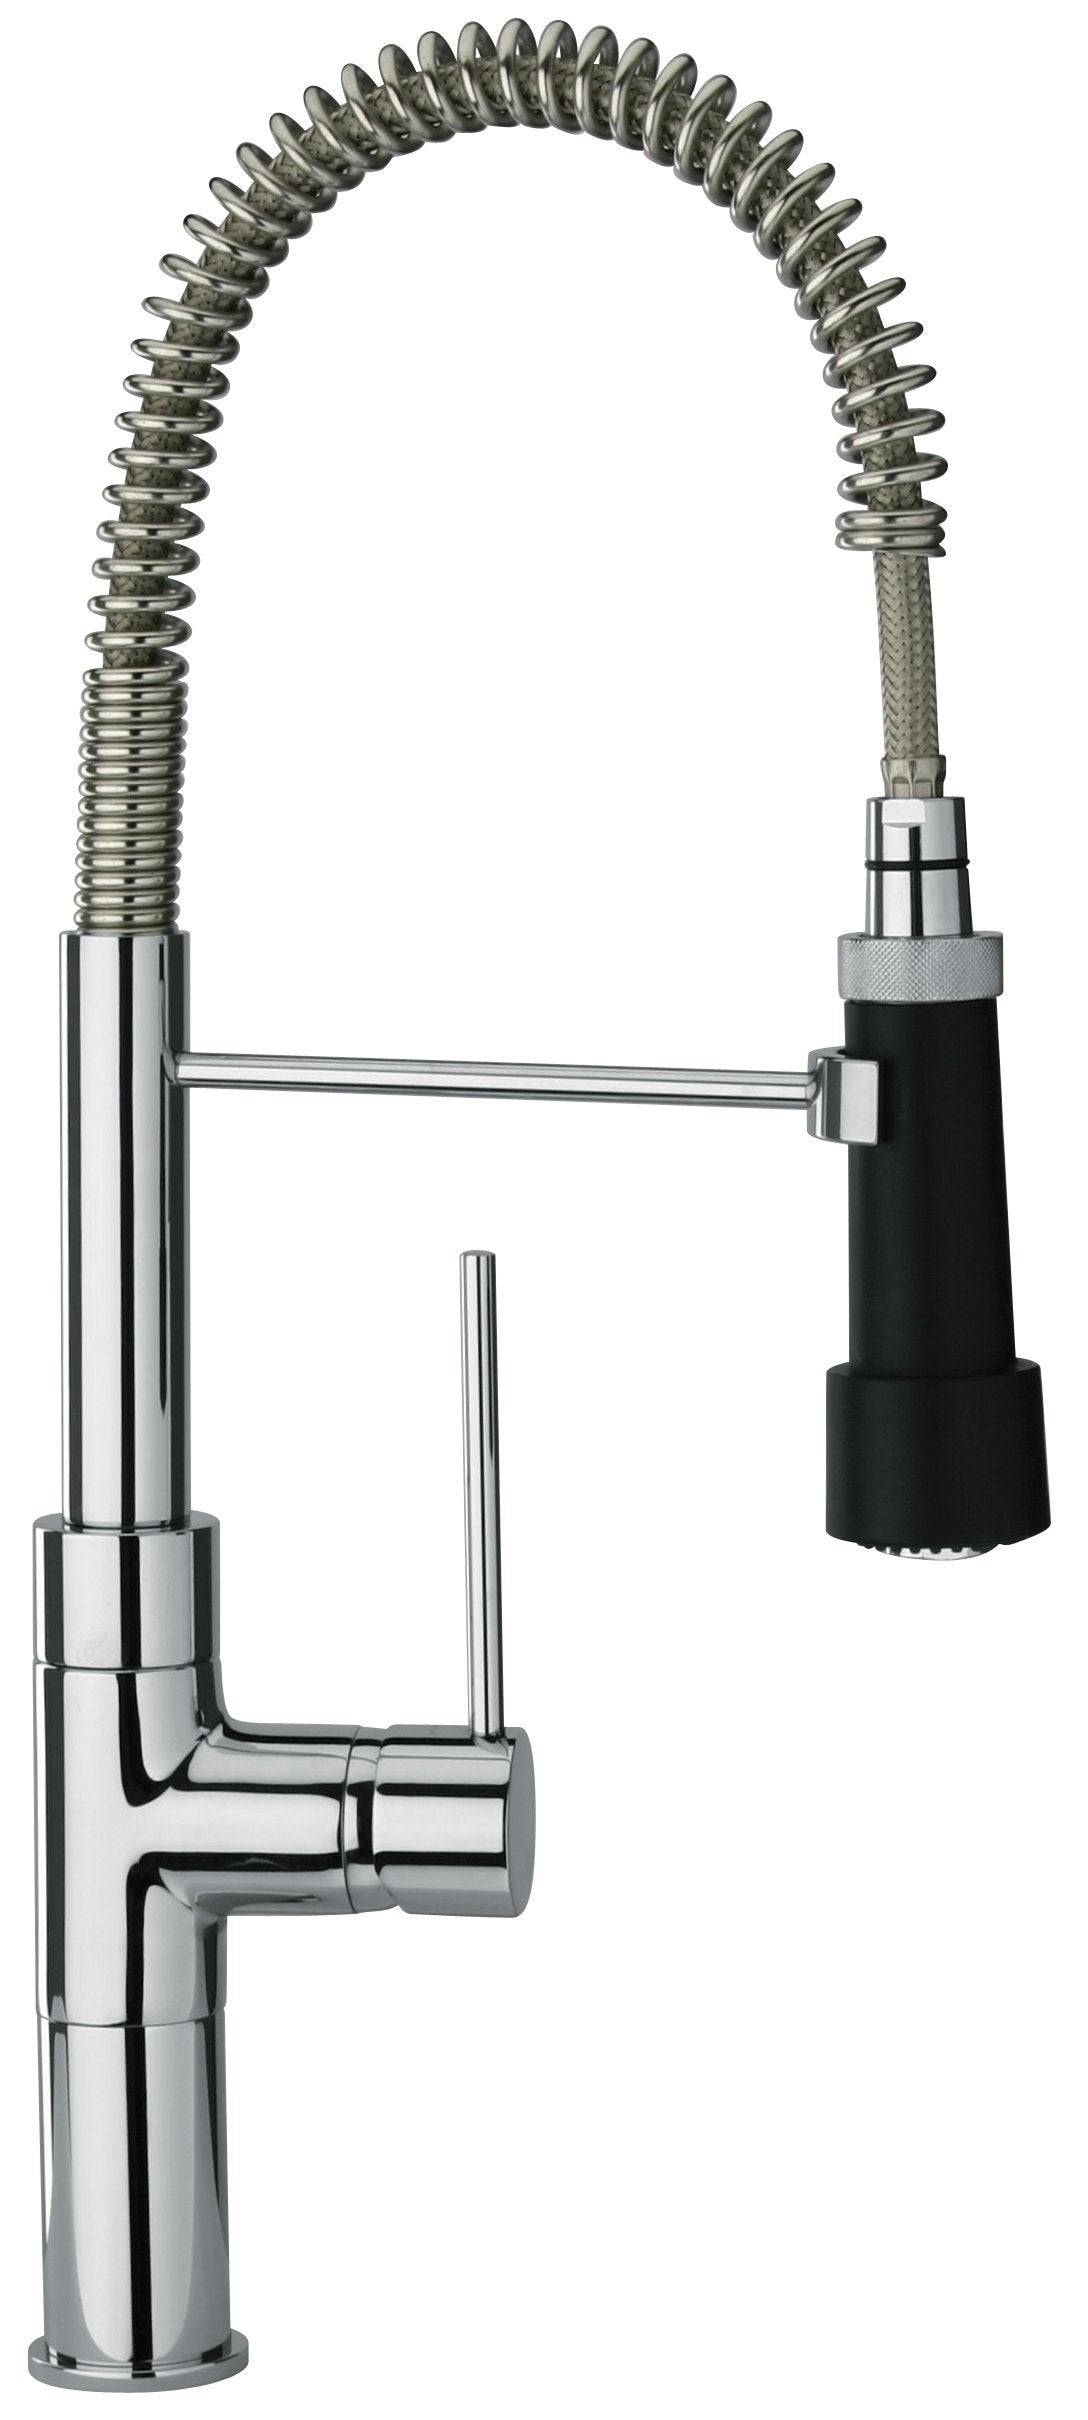 Latoscana Elba Single Handle Kitchen Faucet With Spring Spout In Chrome touch on bathroom sink faucets Latoscana 